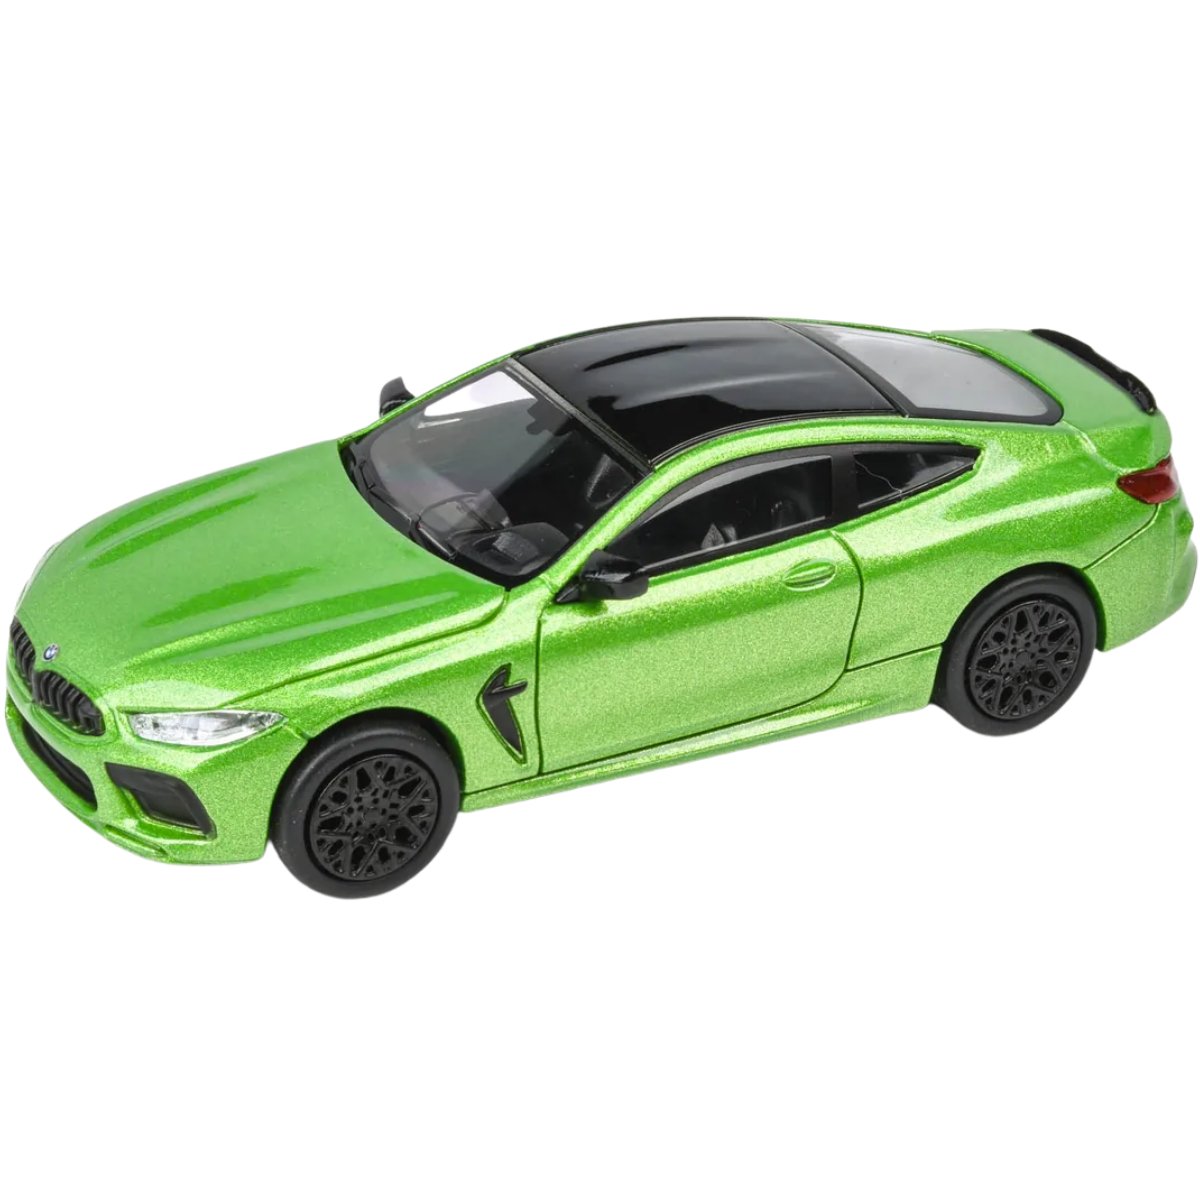 Para64 BMW M8 Coupe Java Green - Phillips Hobbies